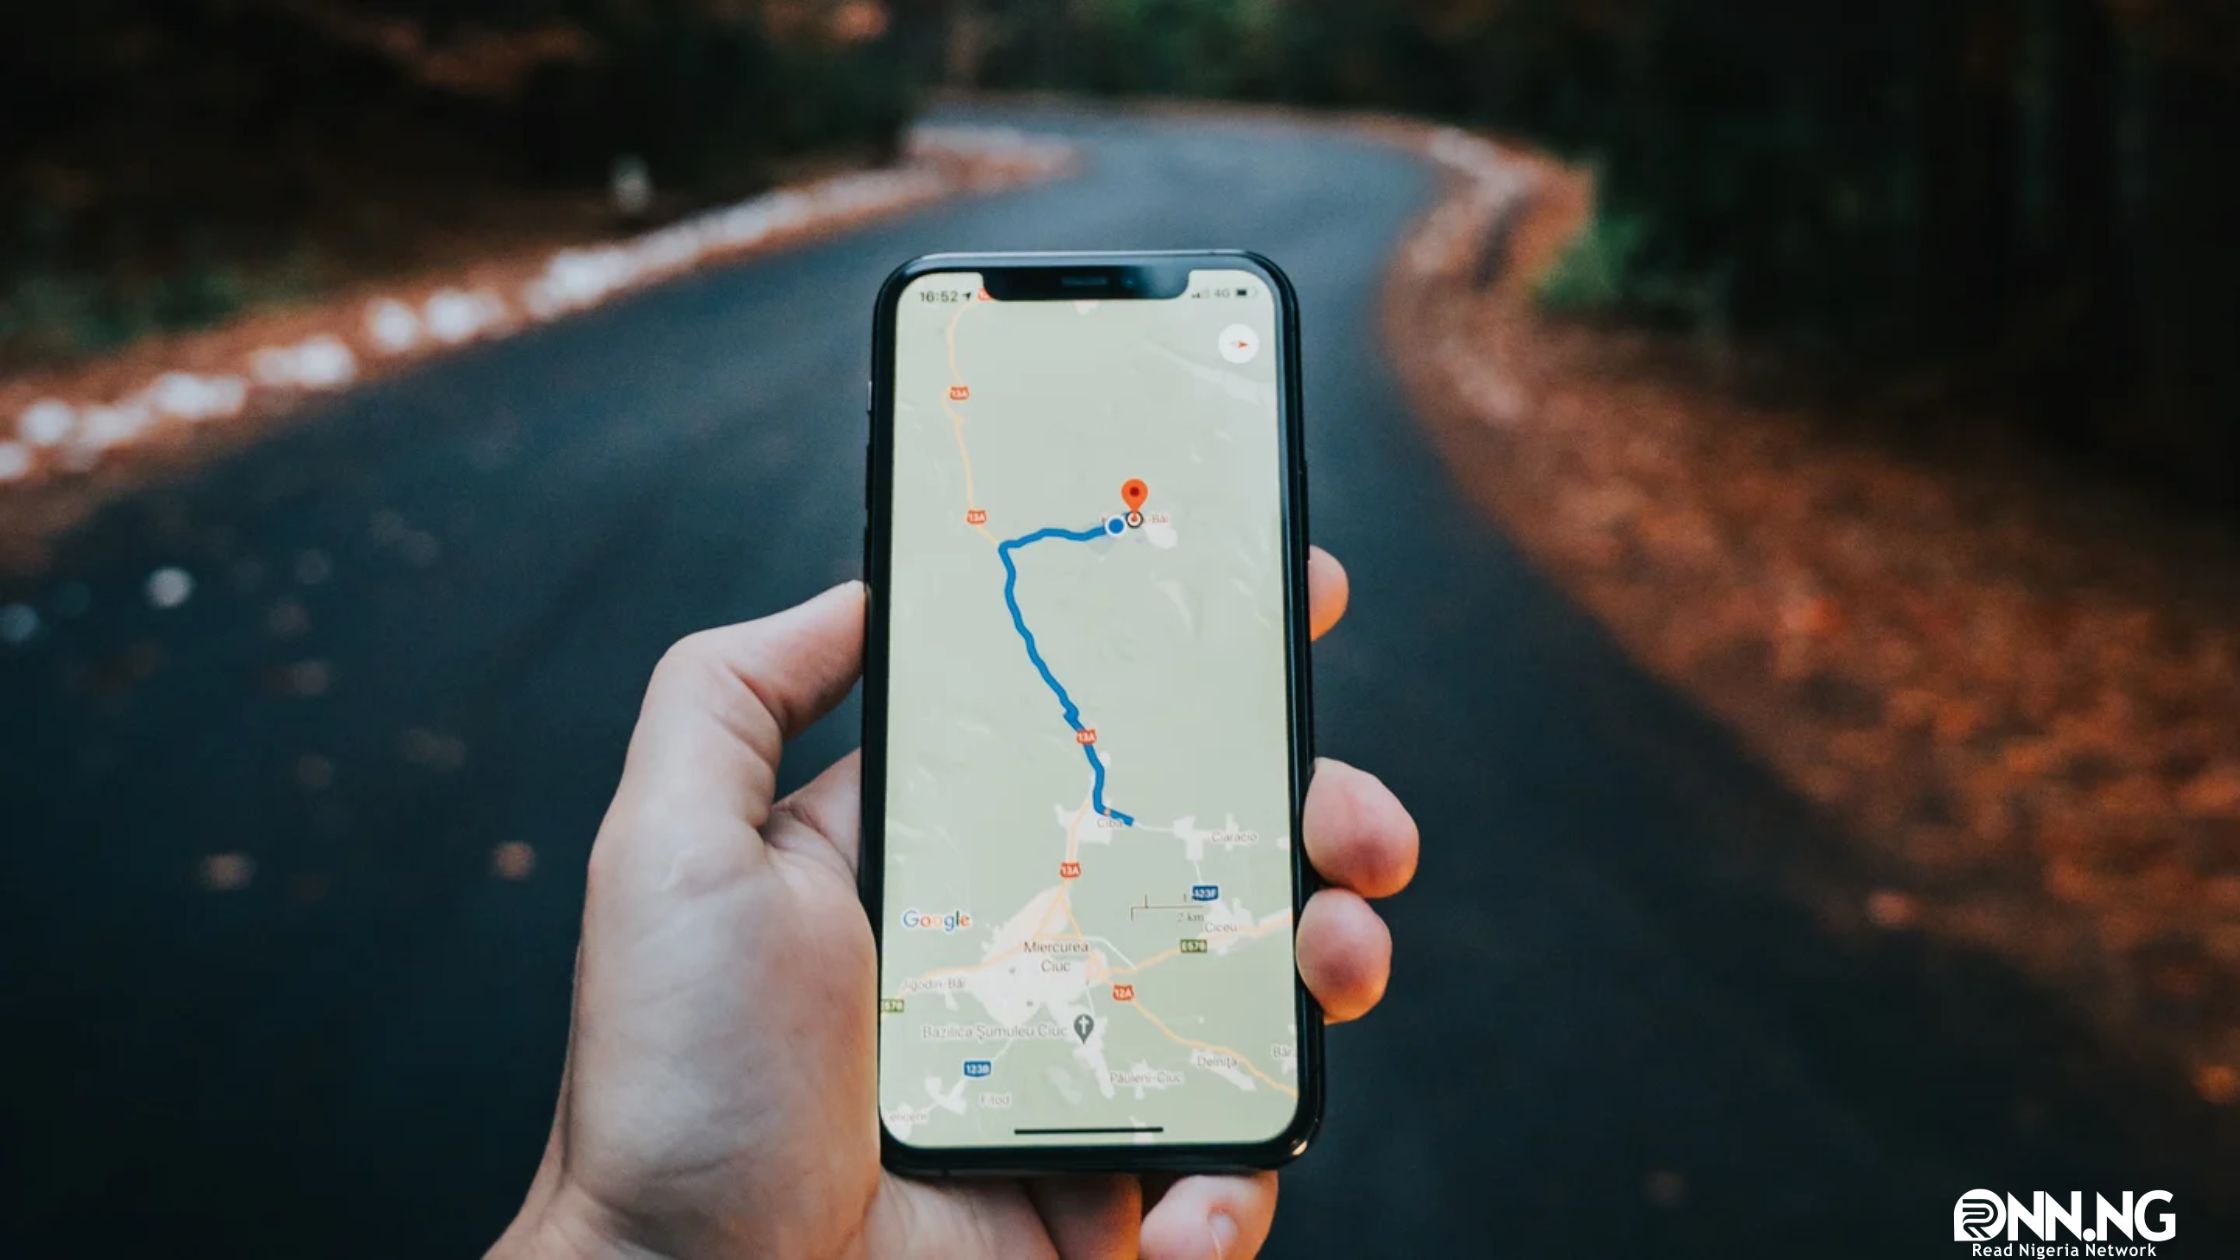 How to Make Money With Google Maps - RNN